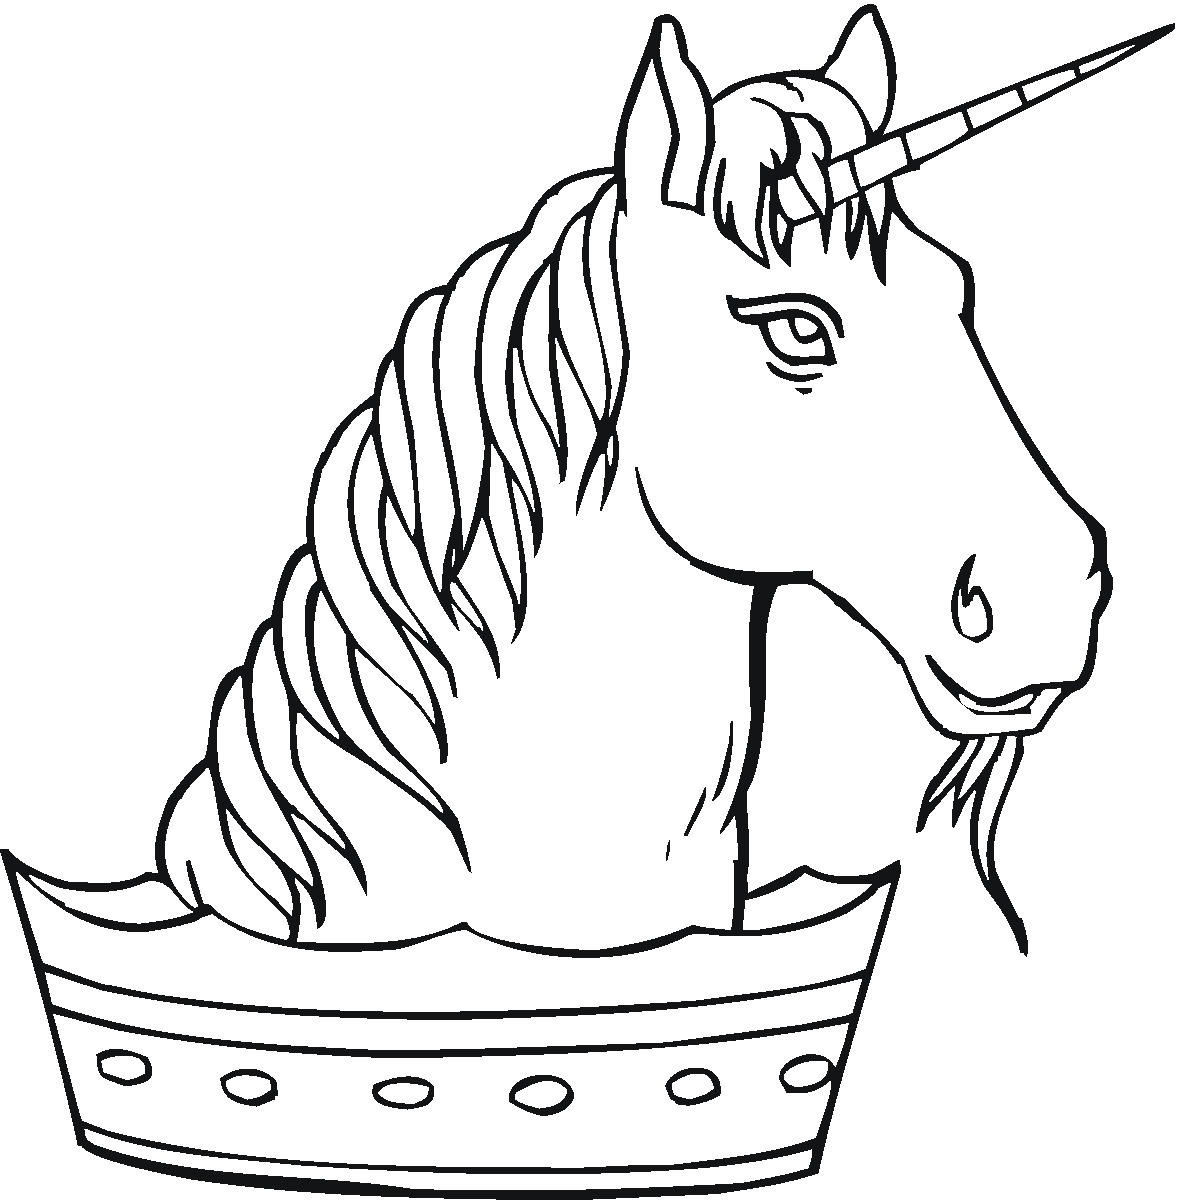 Printable Unicorn Coloring Pages Hard   Coloring Pages ...